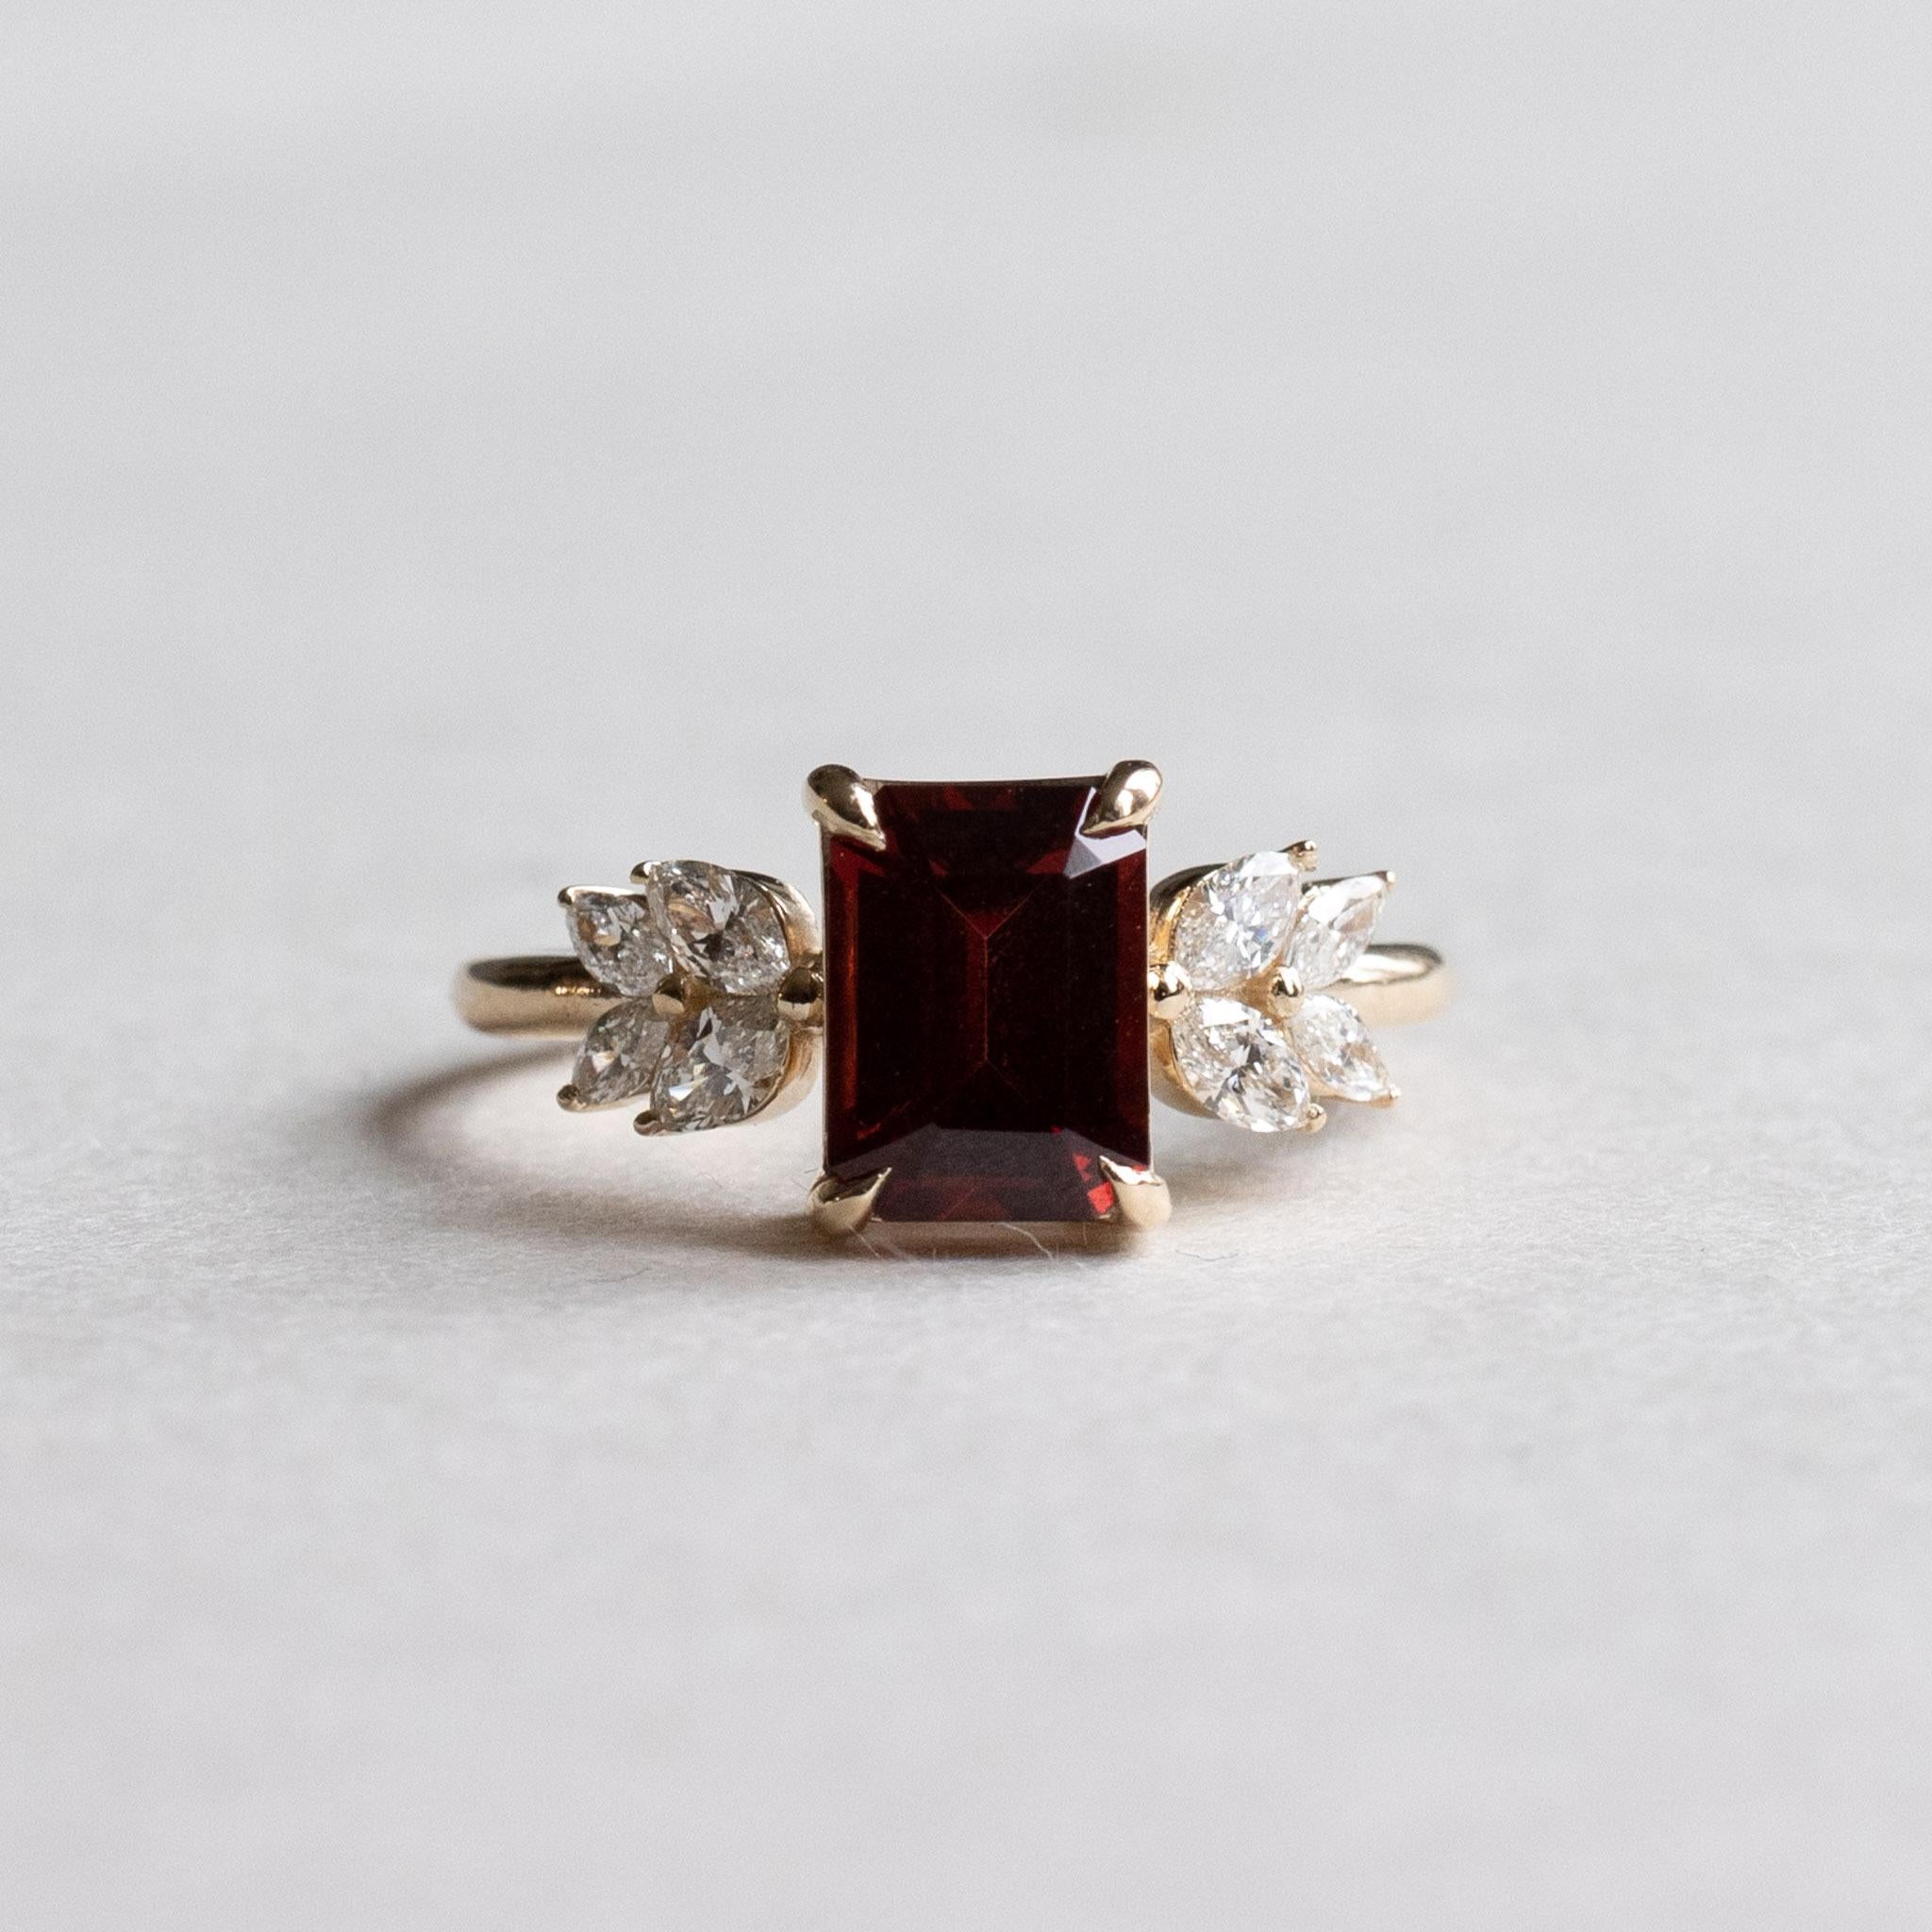 Metal: 14K Yellow Gold
Stone: Emerald Cut Garnet 
Stone Weight: 1.5 carat
Stone Size: 5.75mm x 7.79mm
Accent Stones: Natural Diamonds
Accent Shapes: Marquise 
Shank: 1.6mm